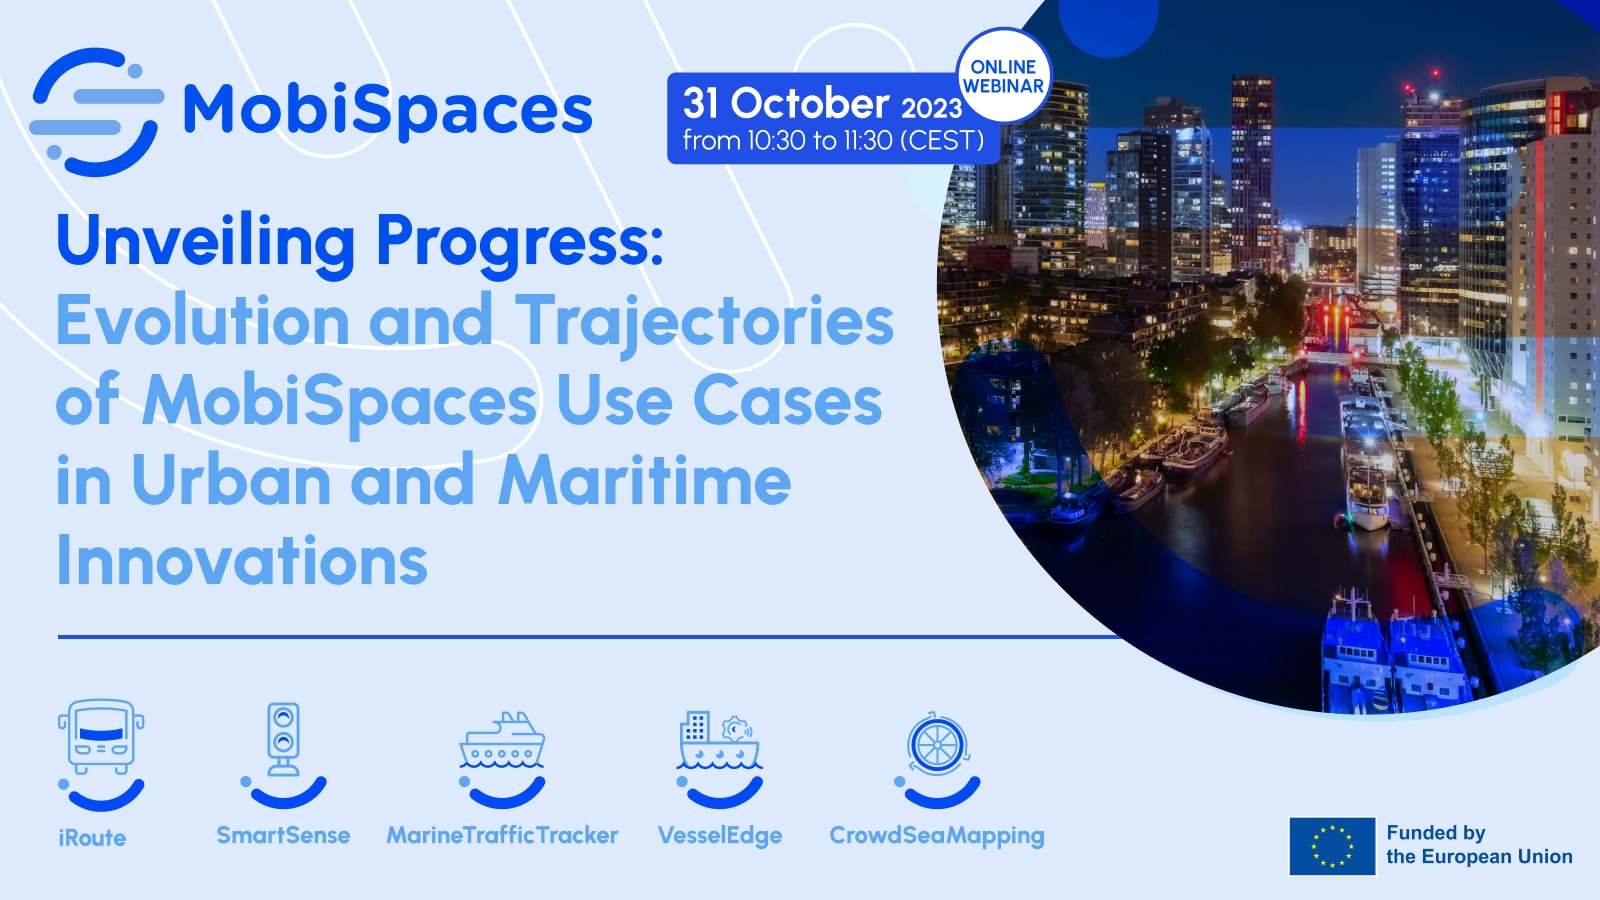 Unveiling Progress: Evolution and Trajectories of MobiSpaces Use Cases in Urban and Maritime Innovations